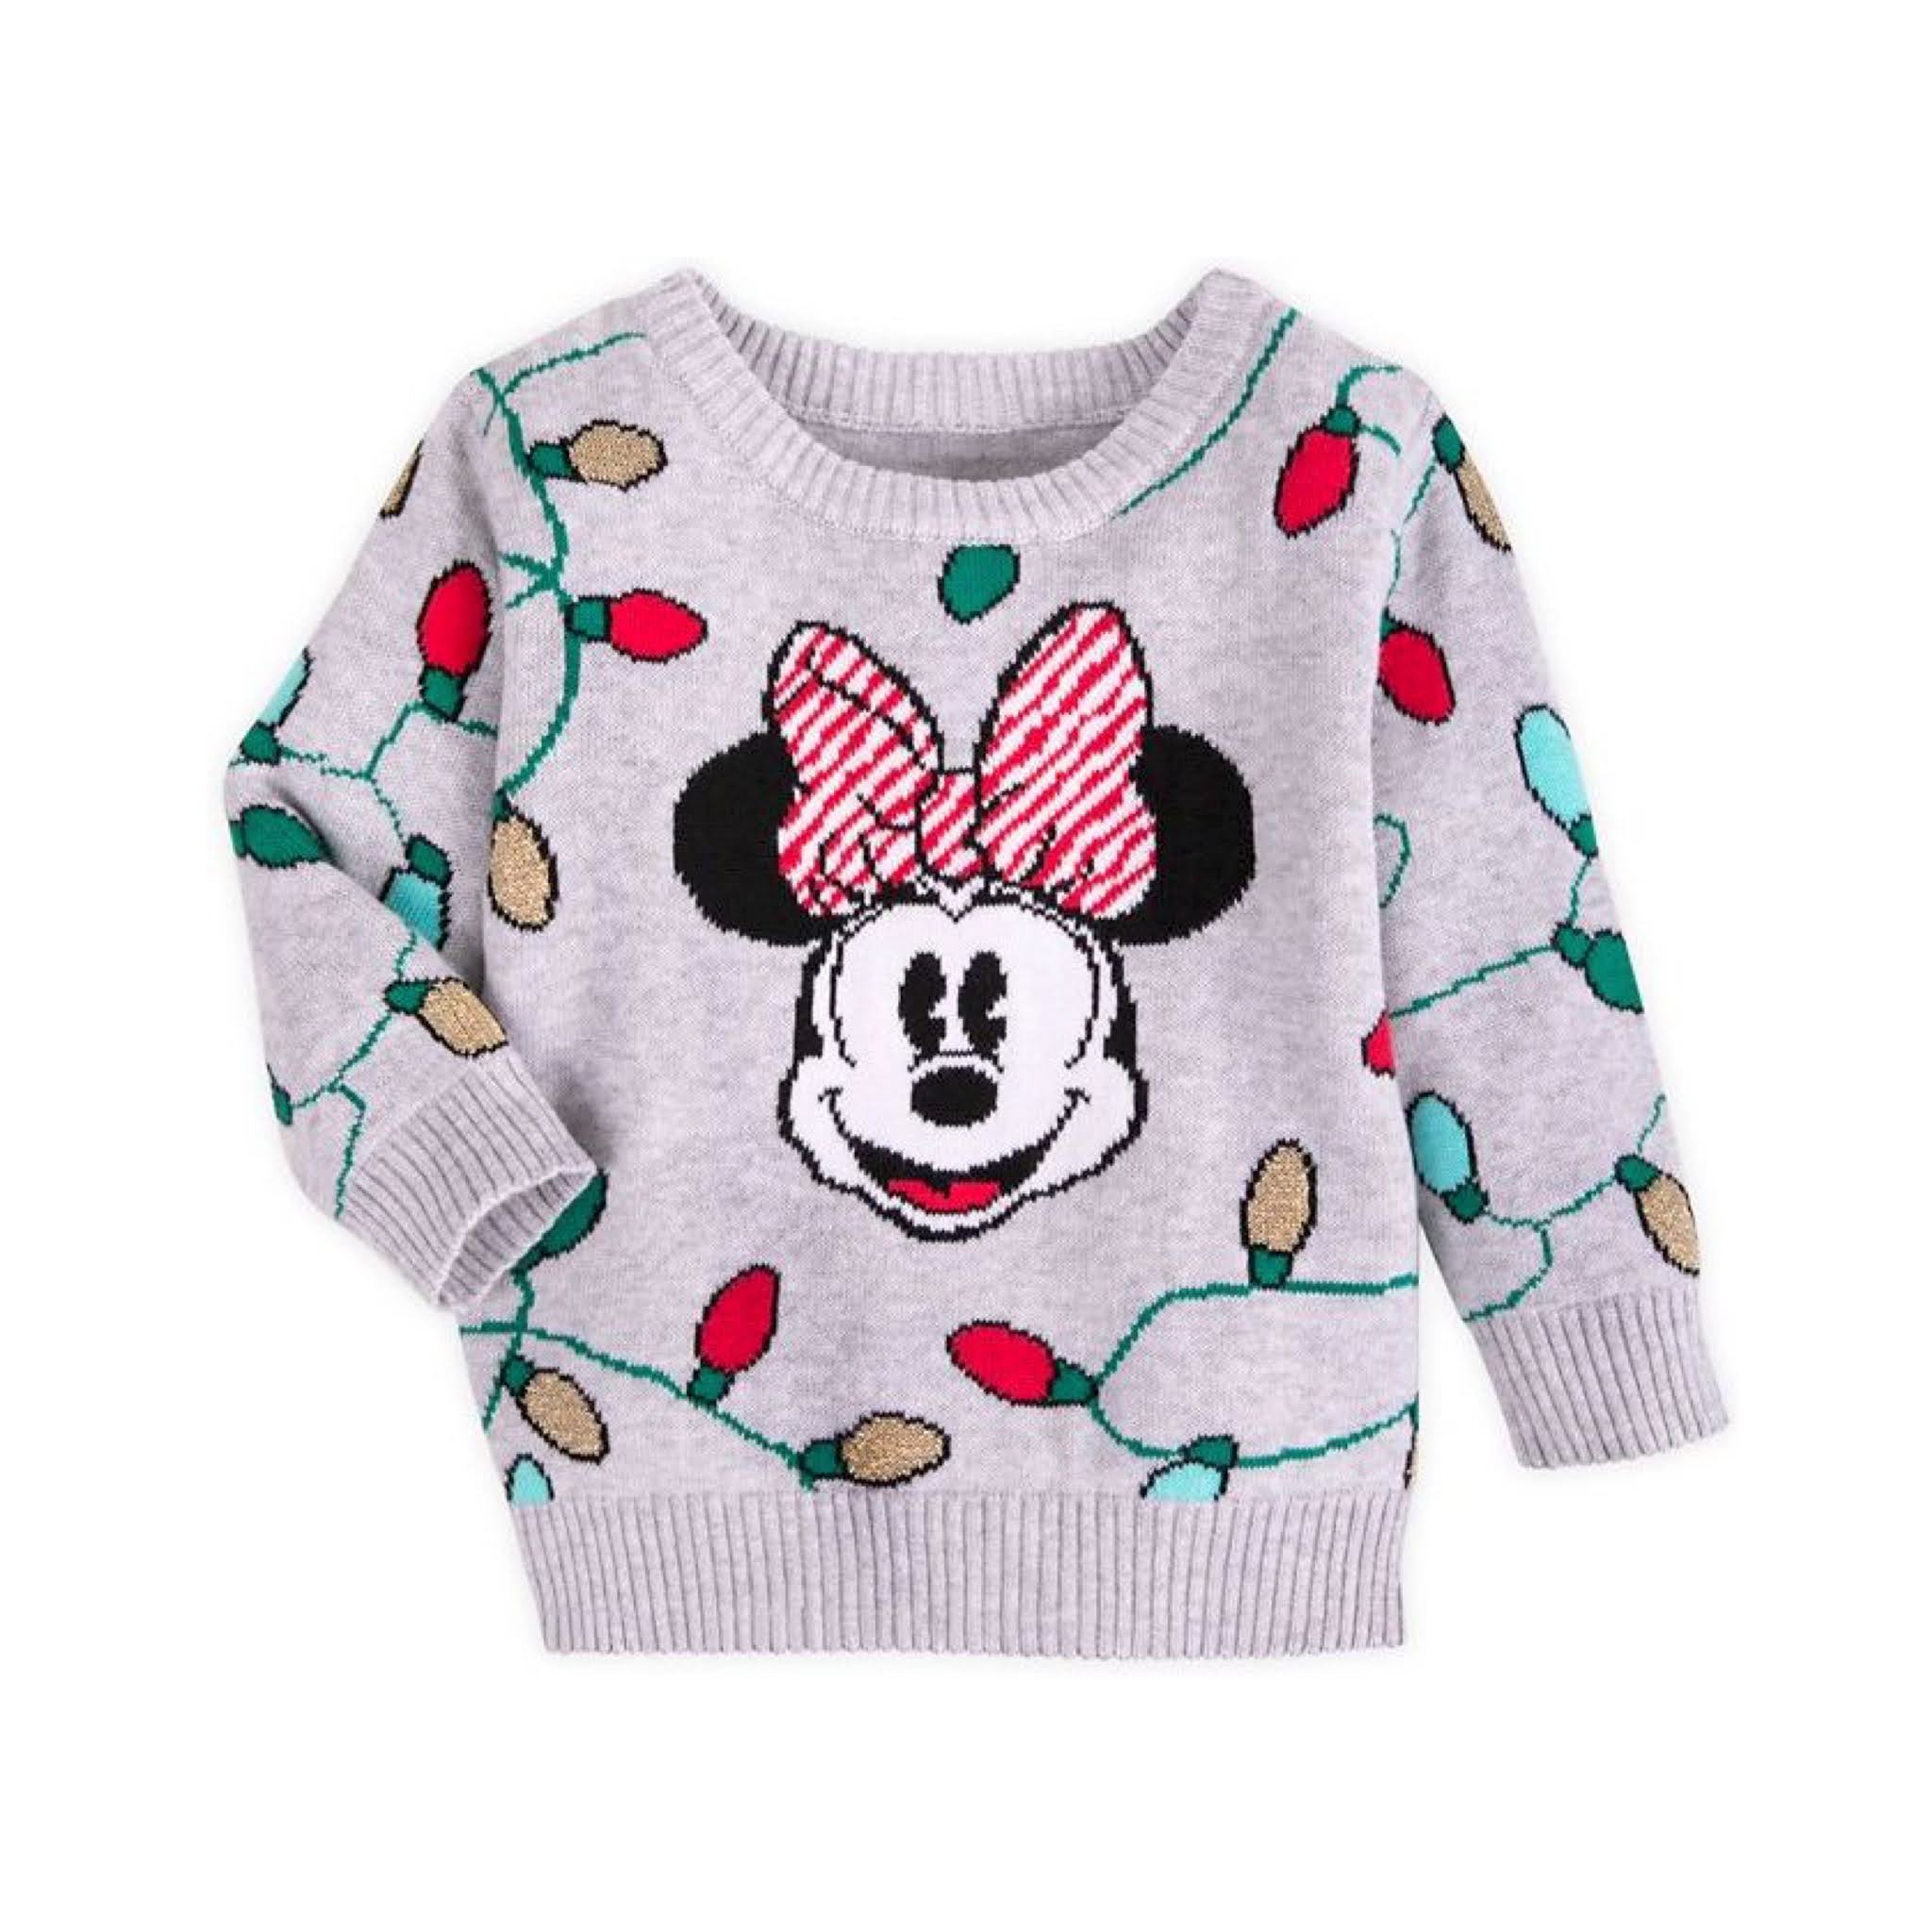 Baby Minnie Mouse Holiday Sweater from Shop Disney